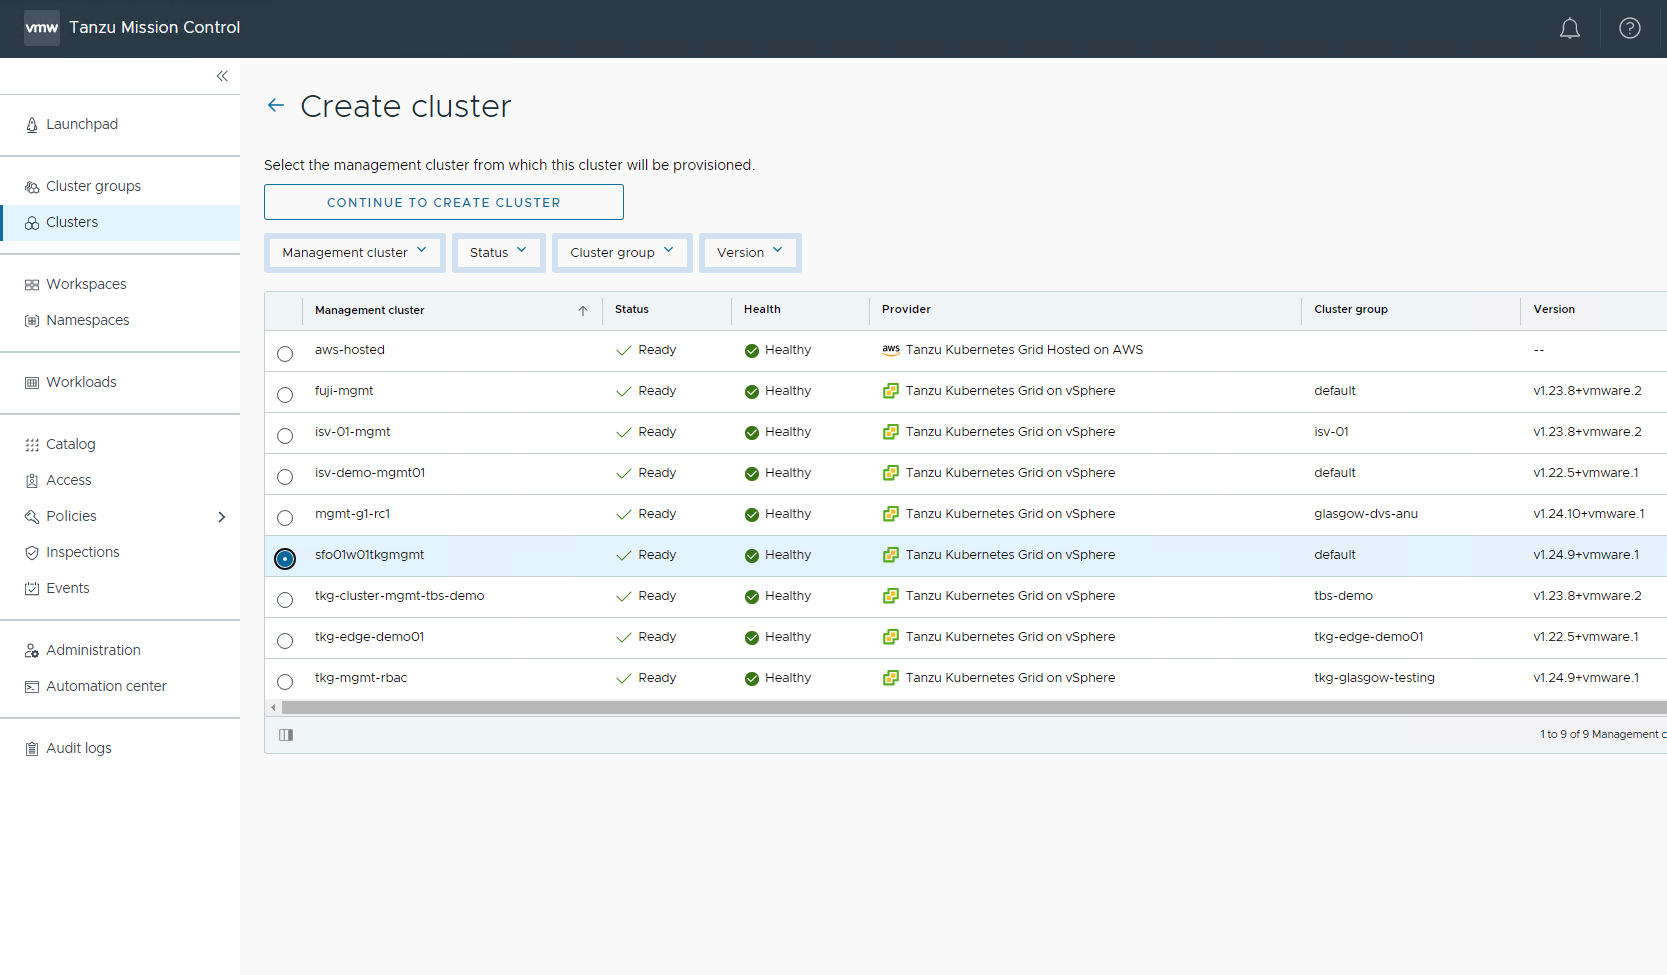 Select management cluster for shared services cluster 